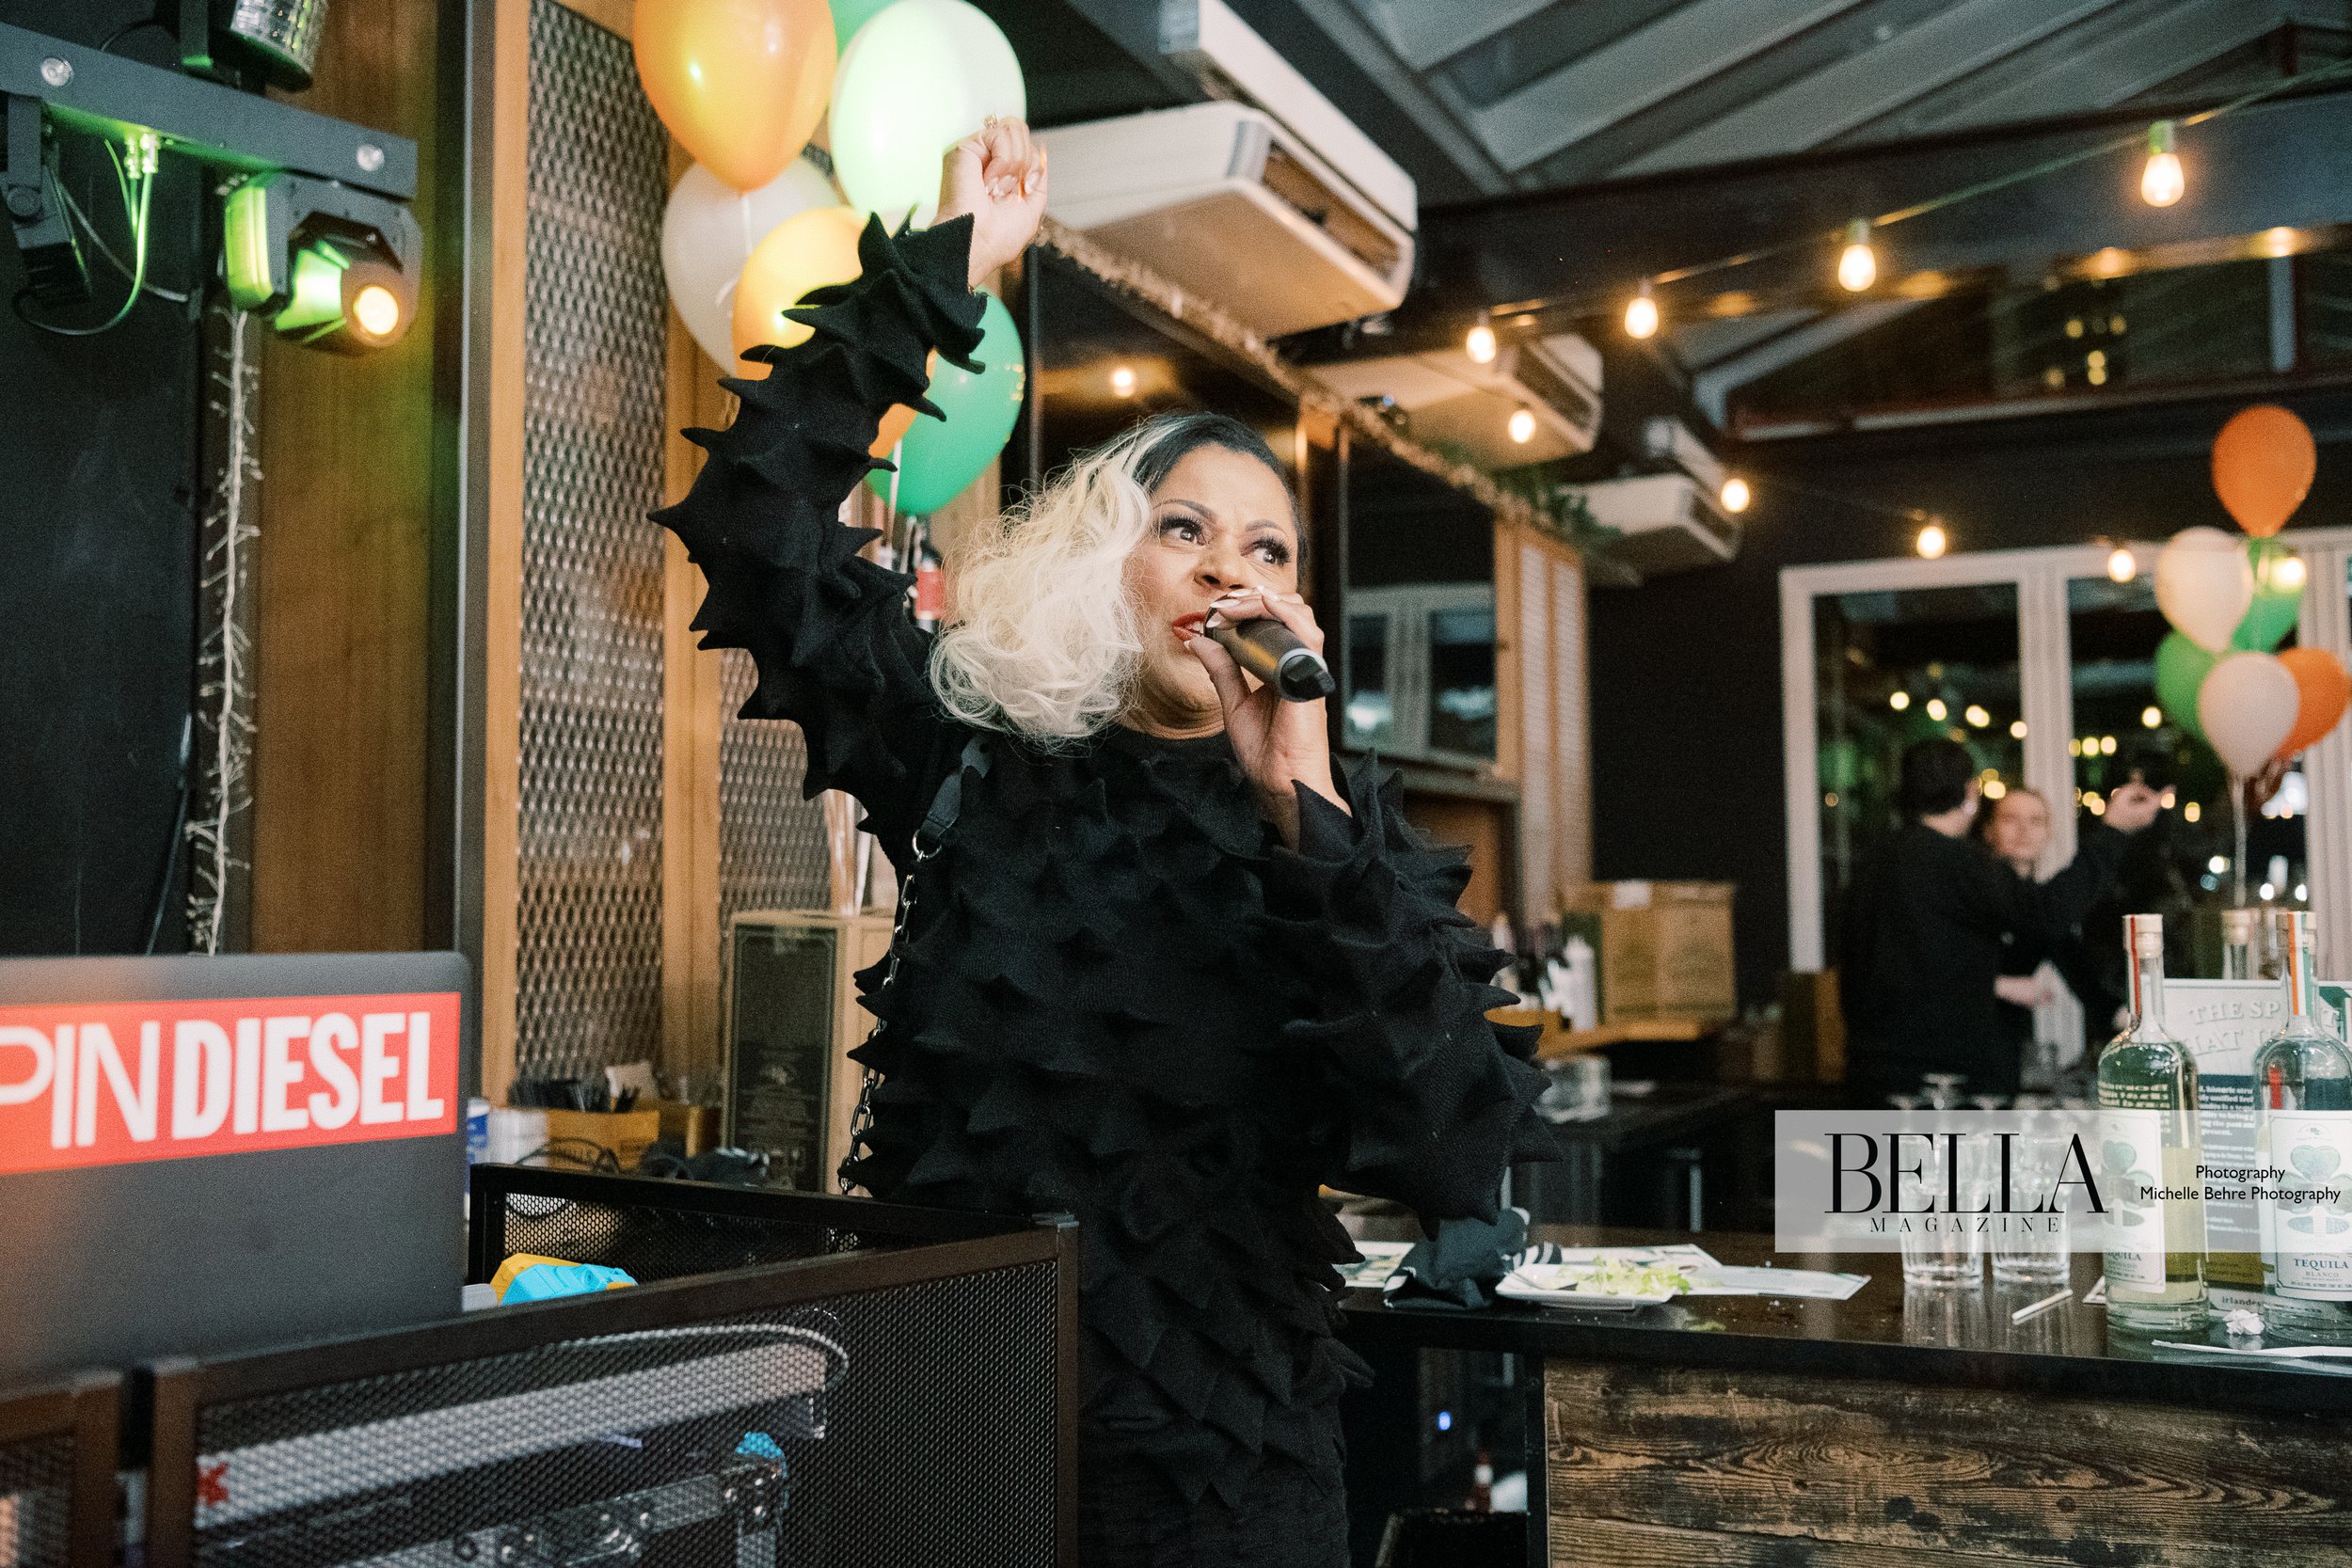 COVERPARTY2Michelle-Behre-Creative-Co-BELLA-Magazine-Women-of-Influence-Cover-Party-Burgerology-229.jpg